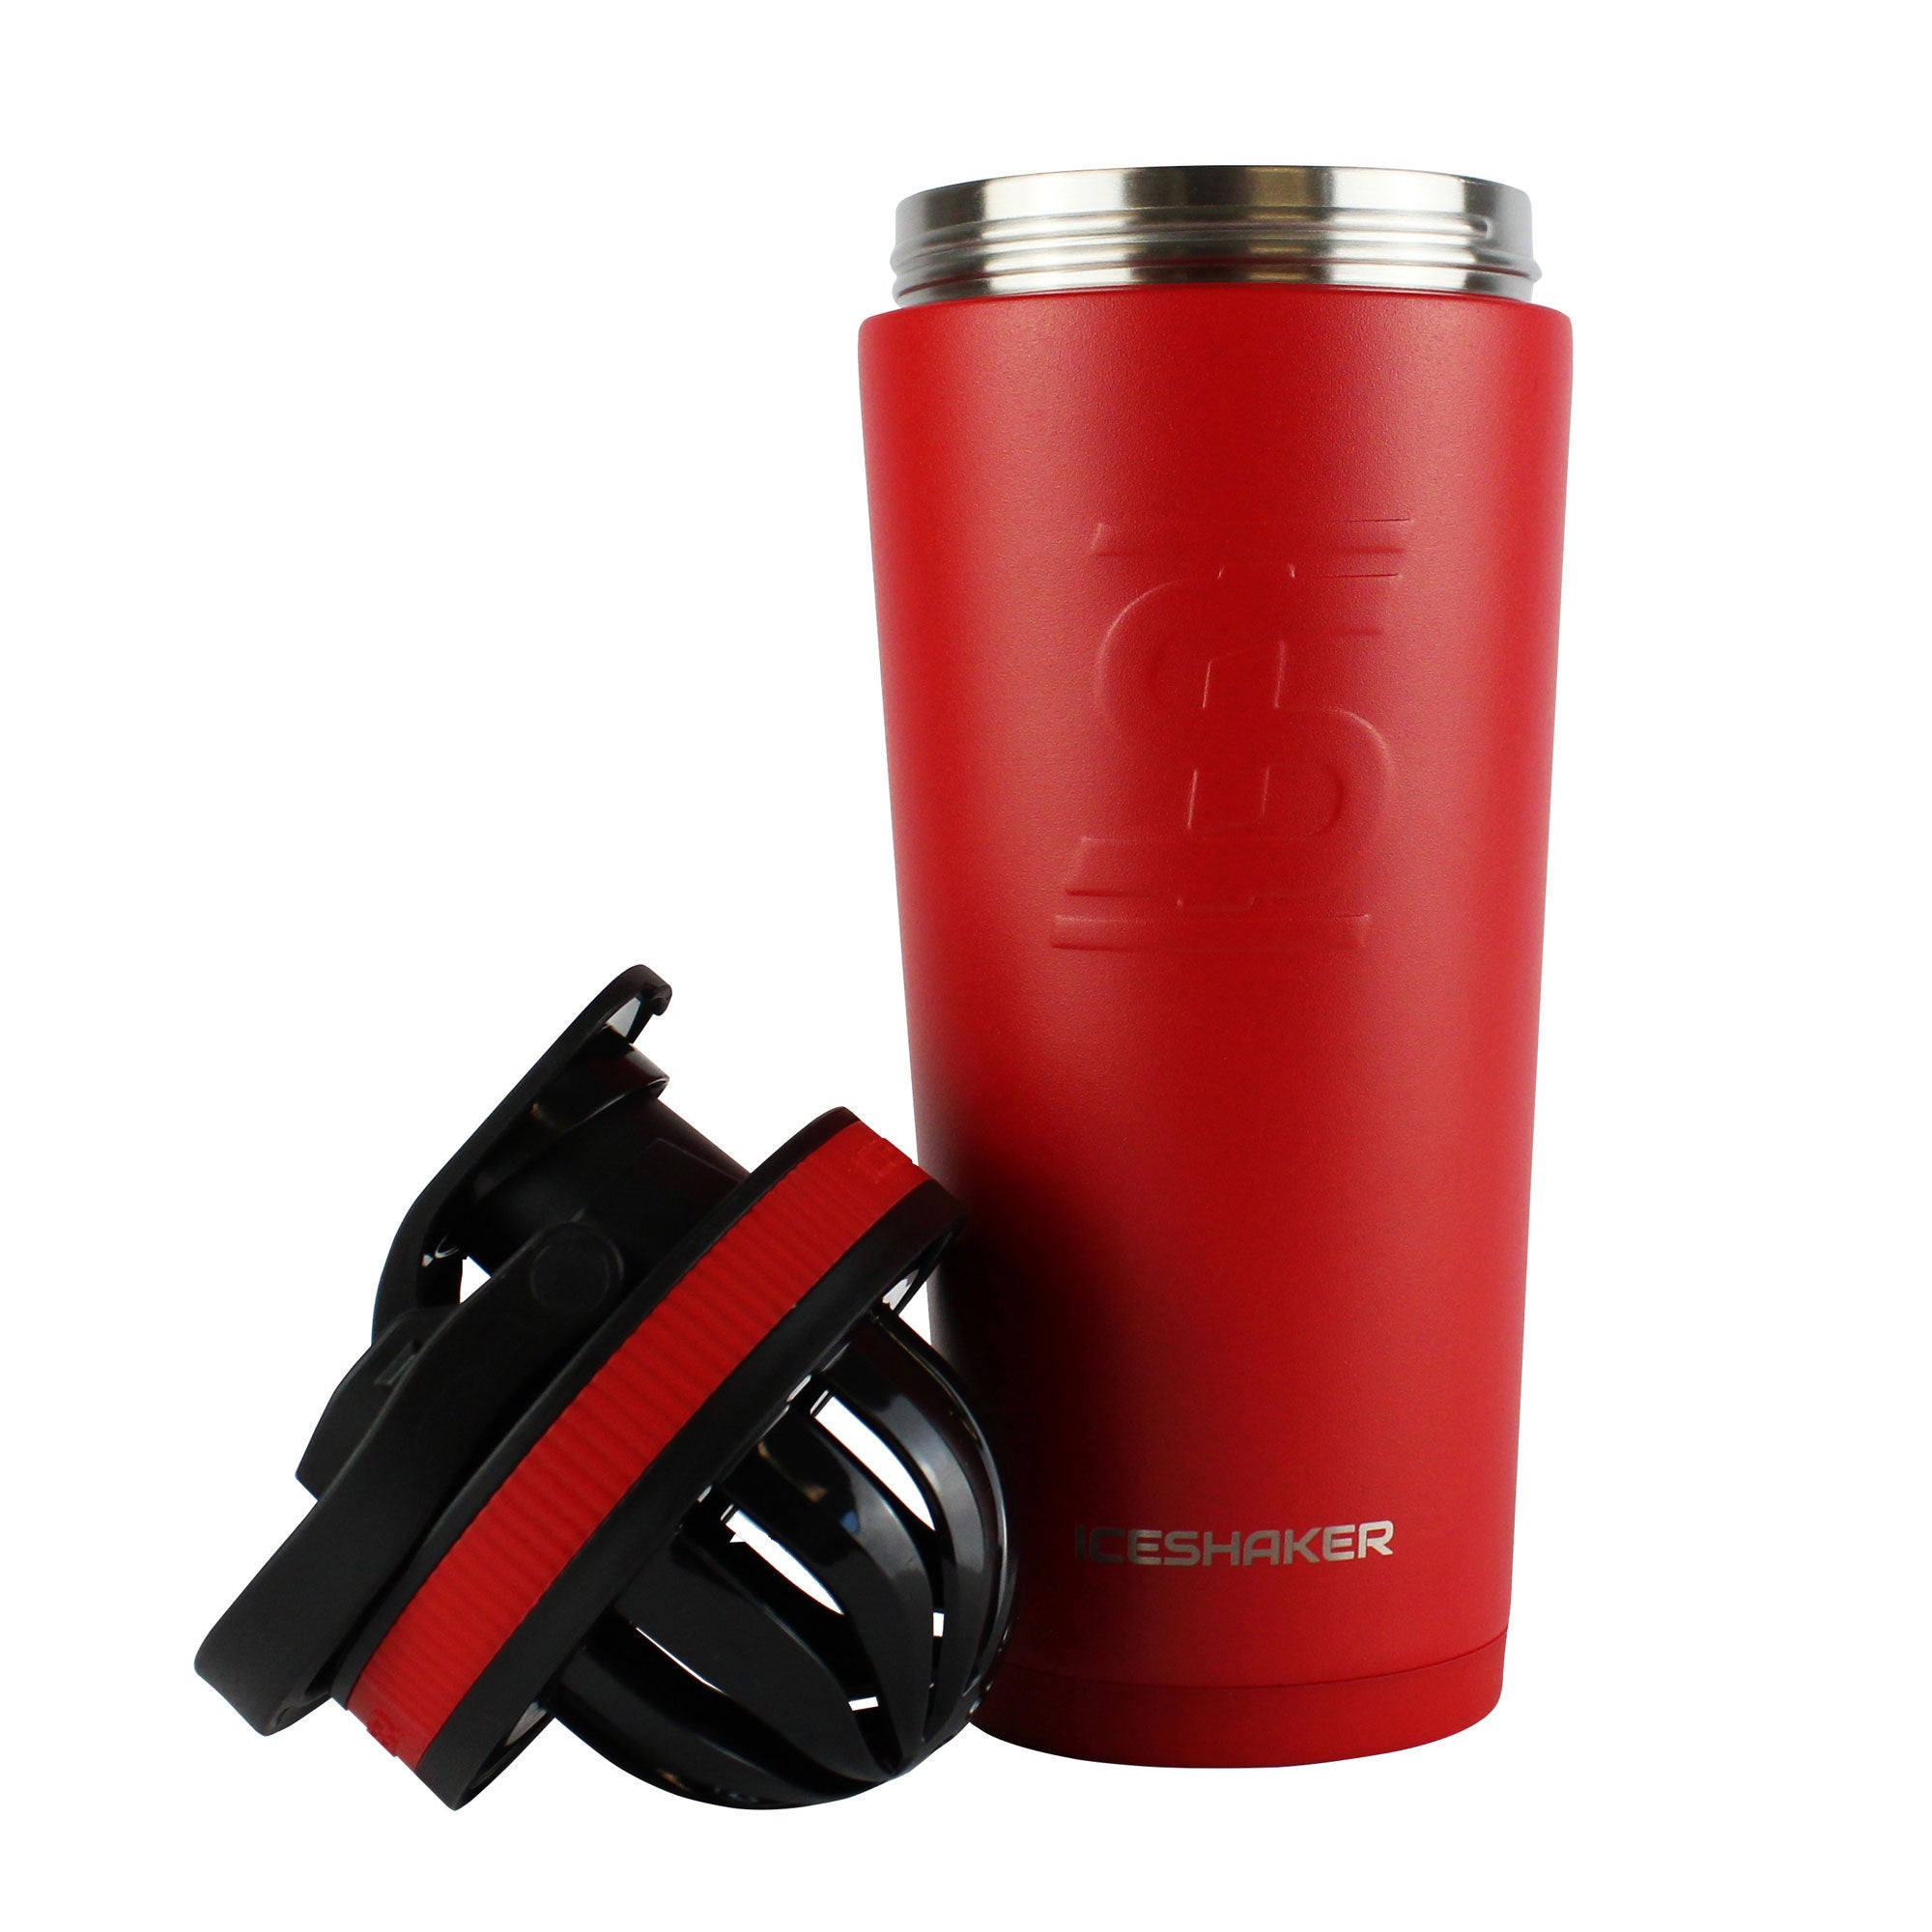 Officially Licensed University of Georgia 26oz Ice Shaker - Red